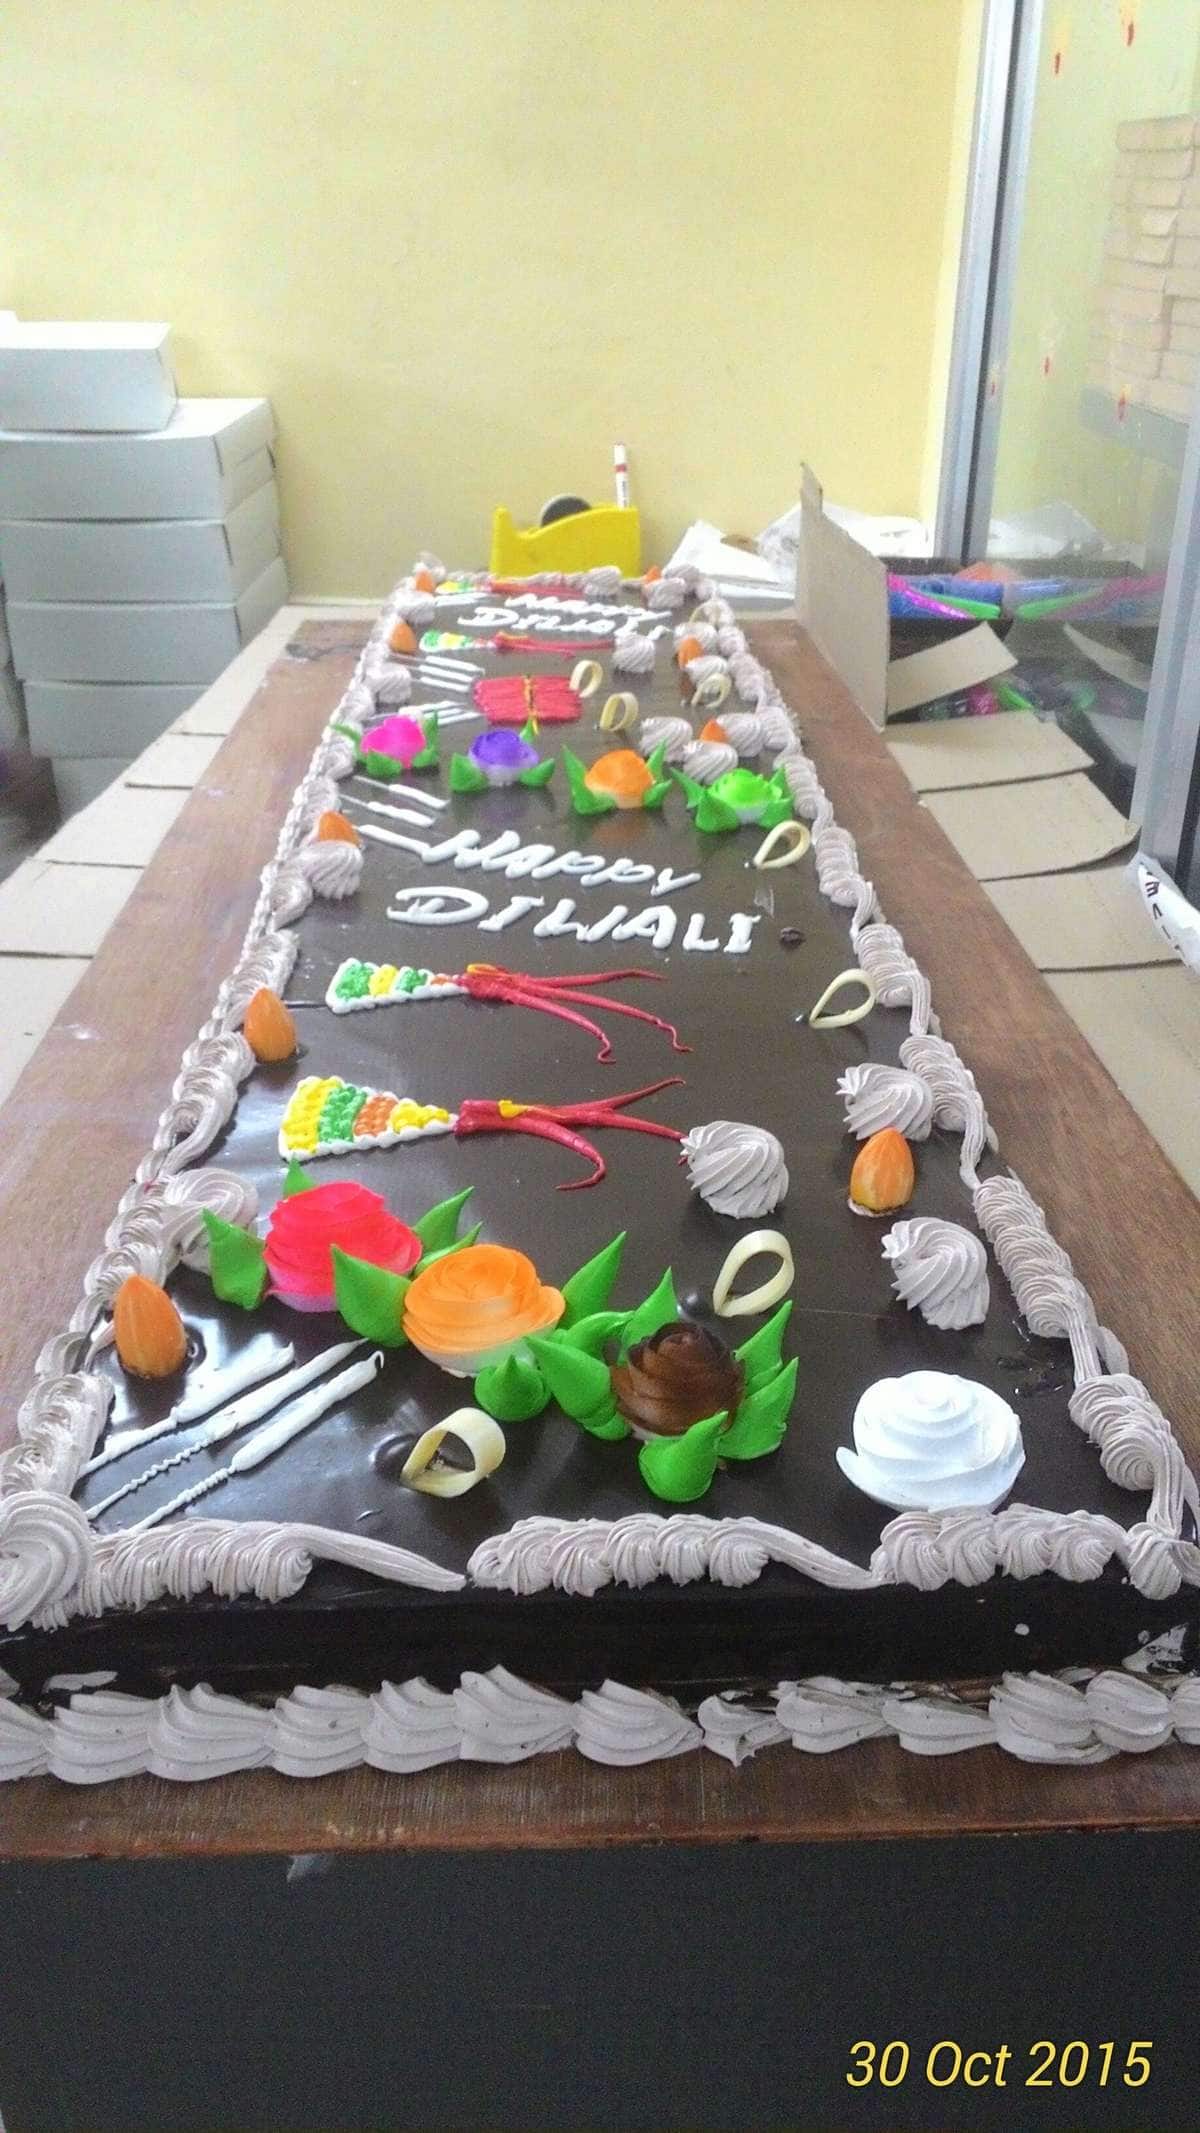 Find list of Fb Cakes in Medavakkam, Chennai - Justdial